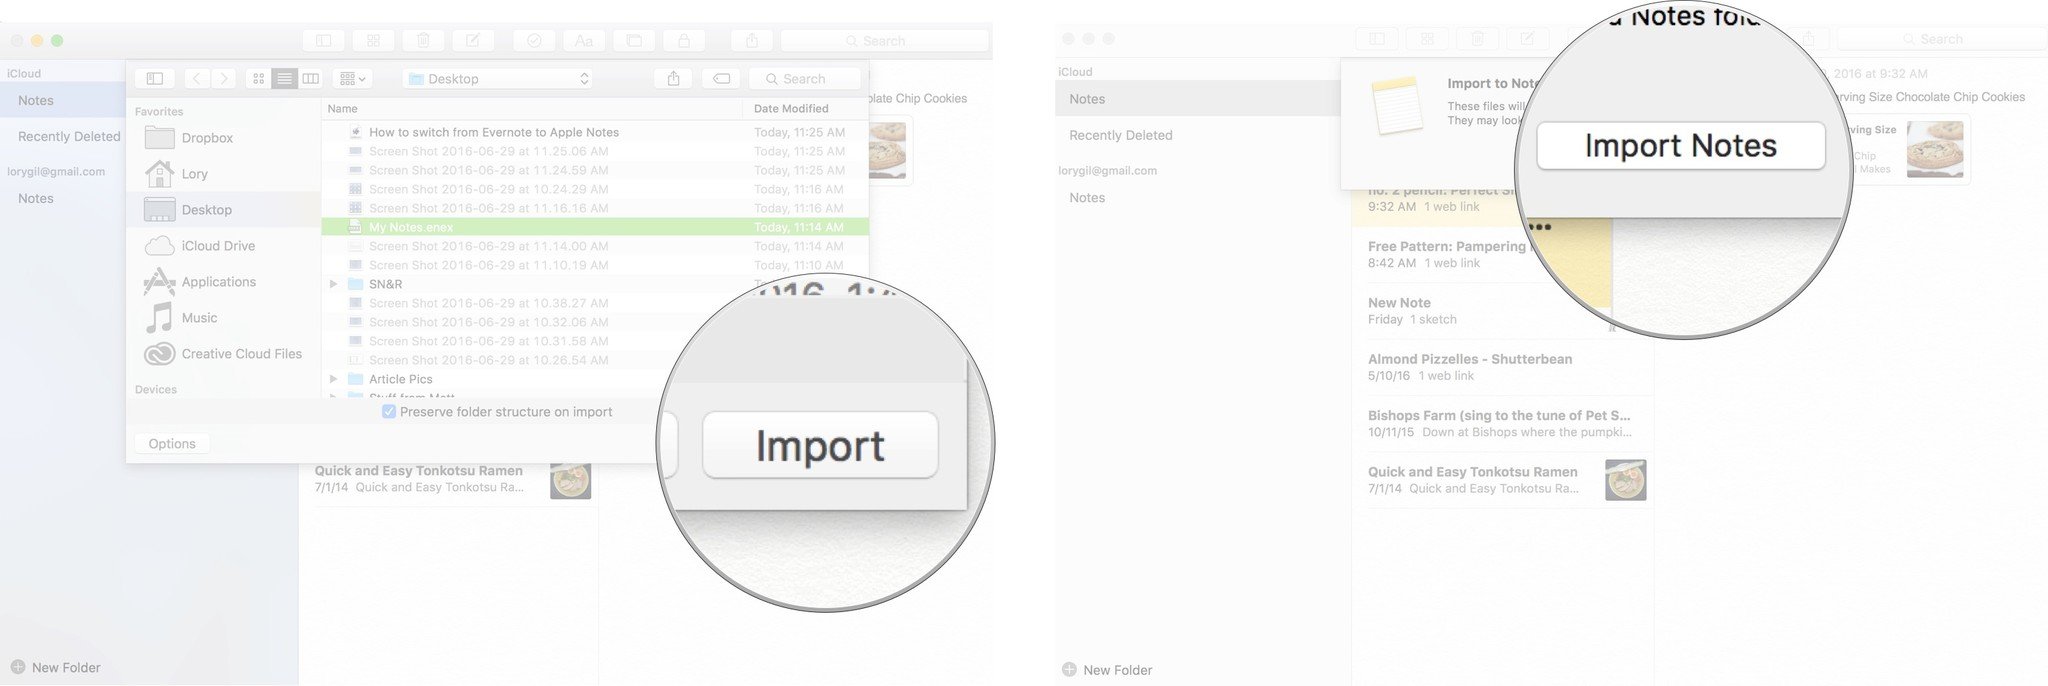 Importing notes in the Notes app on Mac